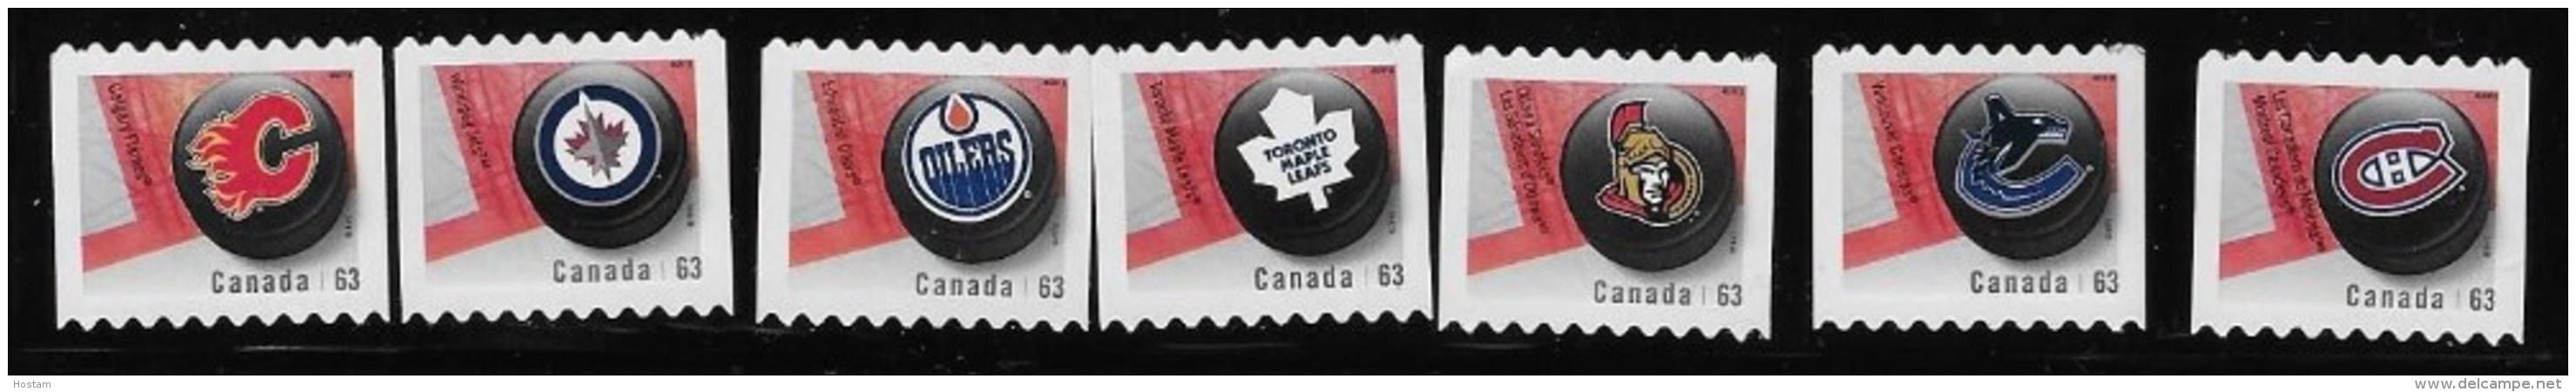 CANADA, 2013, #2662ii-8ii, NHL TEAM LOGO  COIL STAMPS - 7 CANADIAN TEAMS   SINGLE - Roulettes